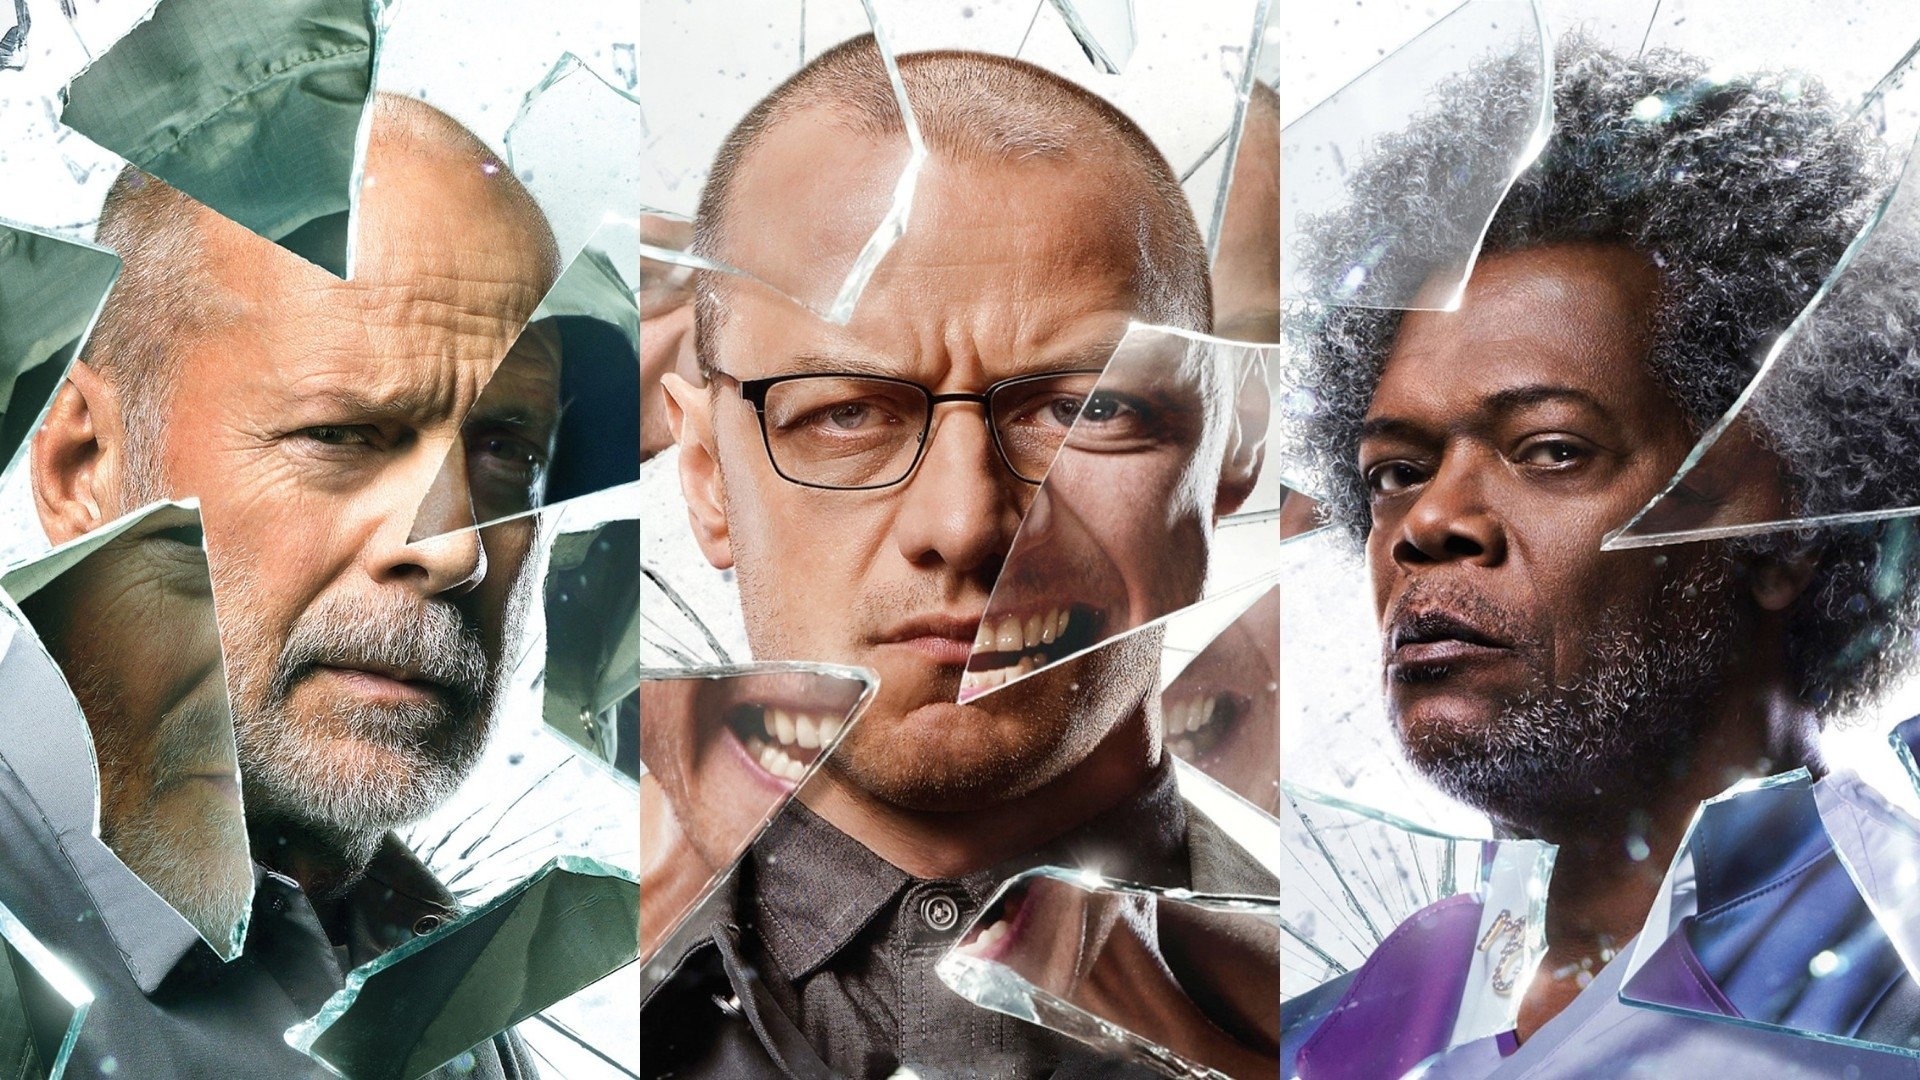 Glass (Movie): The film takes place three weeks after the events in Split (2016). 1920x1080 Full HD Wallpaper.